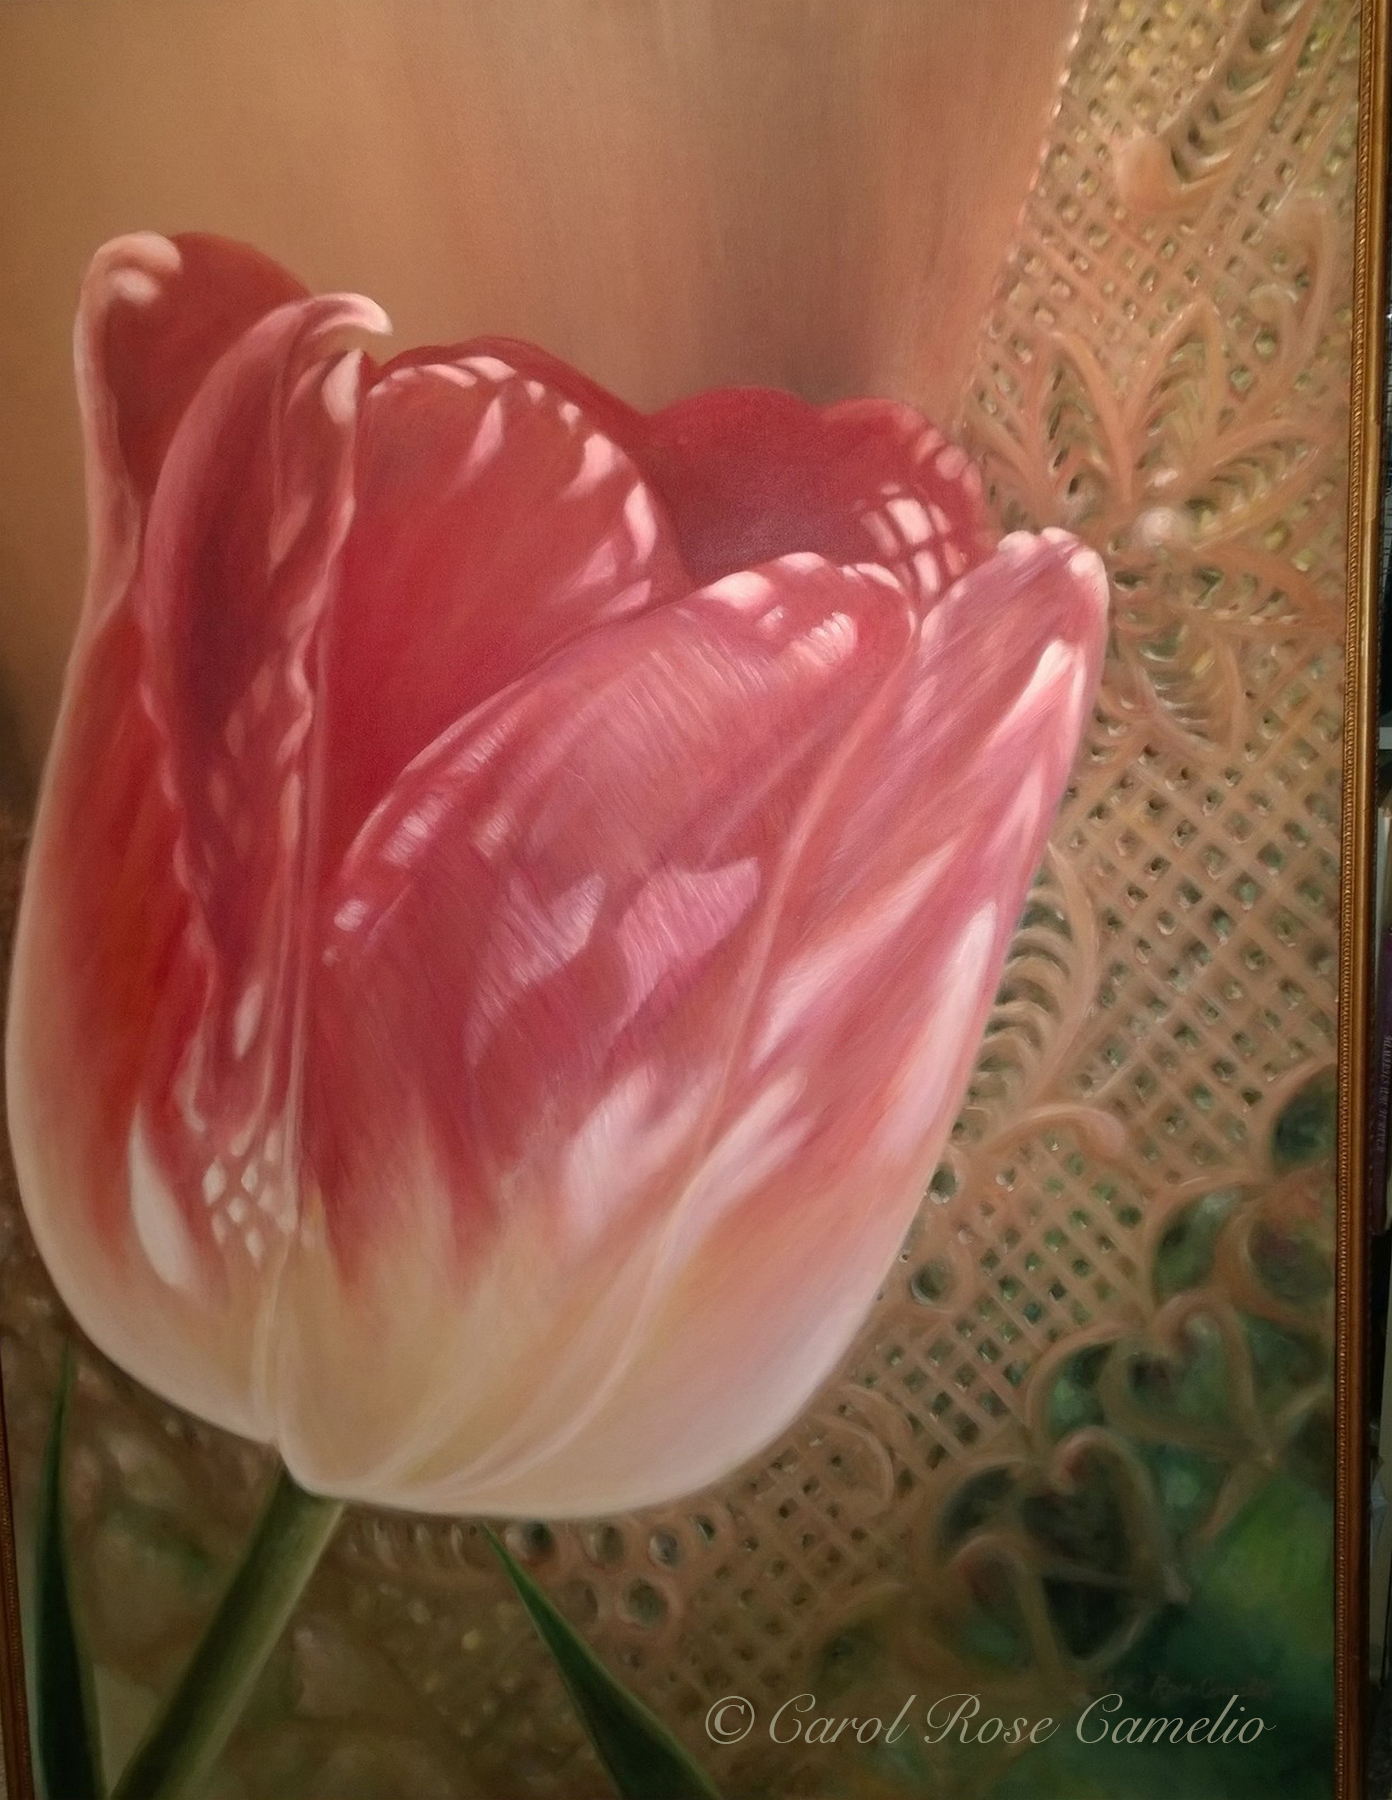 Tulip: A closeup of a sunlit pink tulip, with a decorative doily in the background.